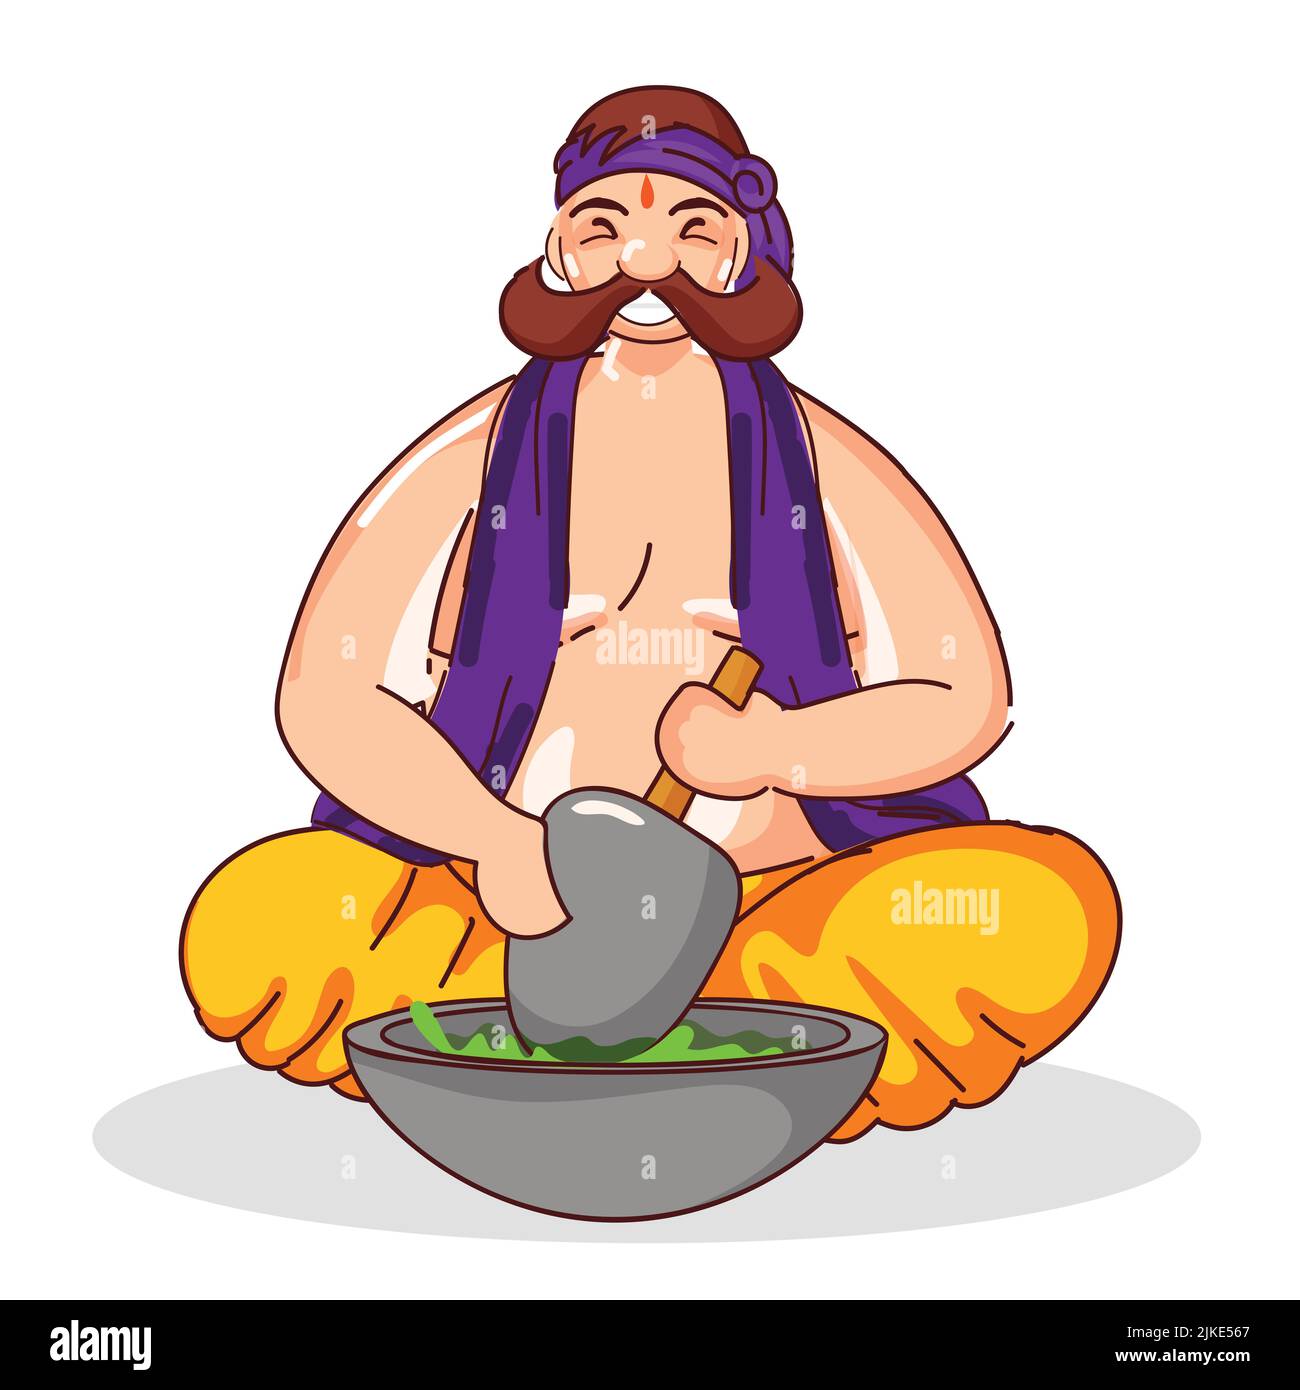 Cartoon Mustache Man Grinding Weed From Mortar And Pestle On White Background. Stock Vector